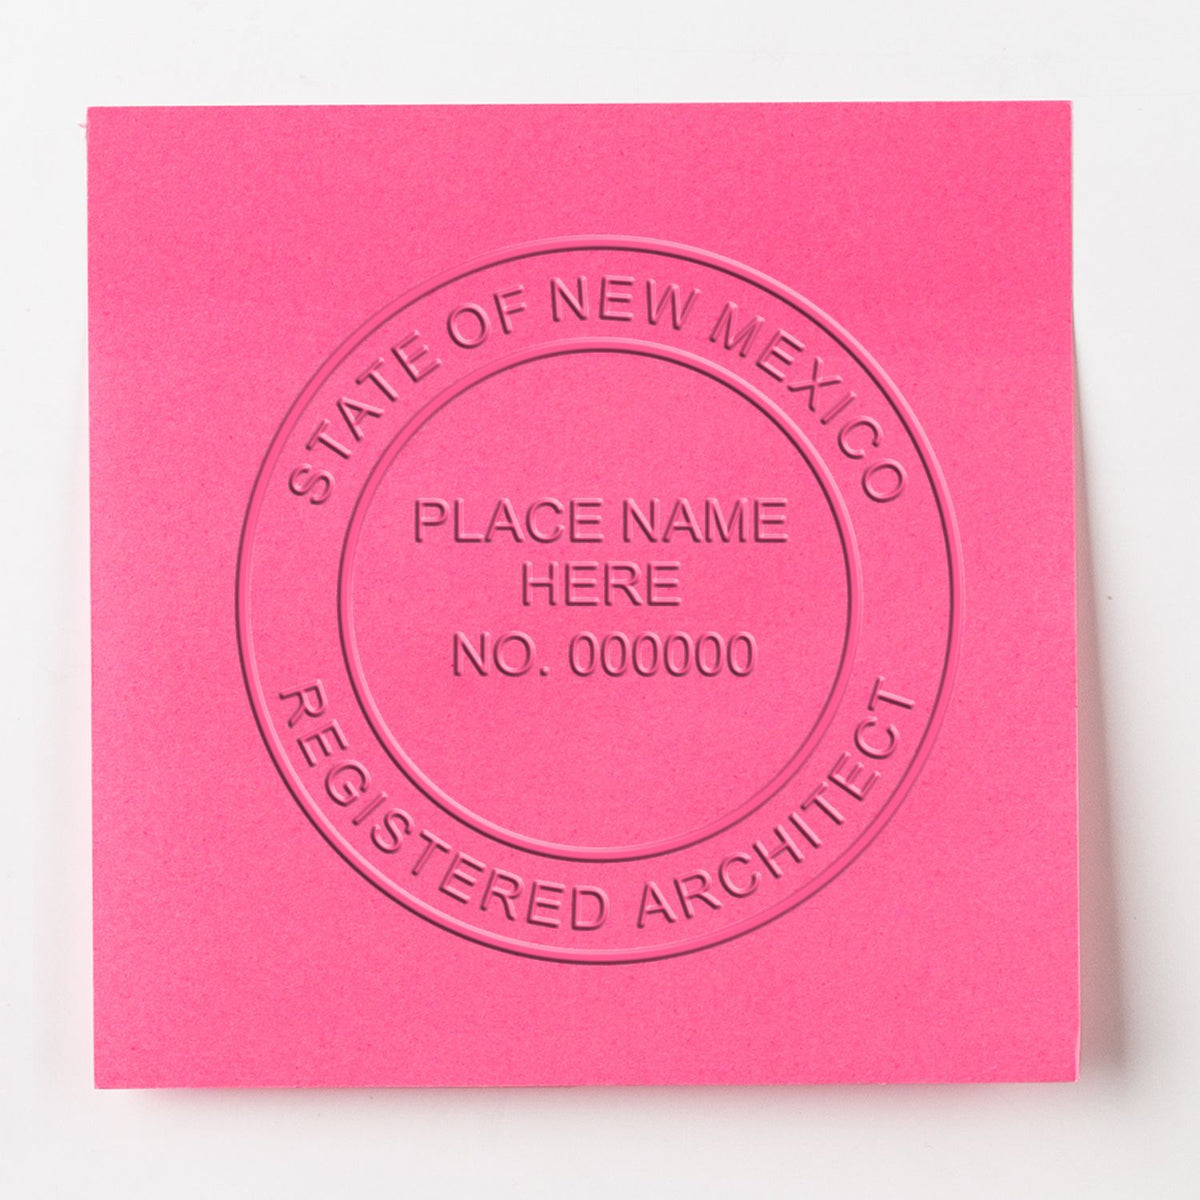 An in use photo of the Gift New Mexico Architect Seal showing a sample imprint on a cardstock